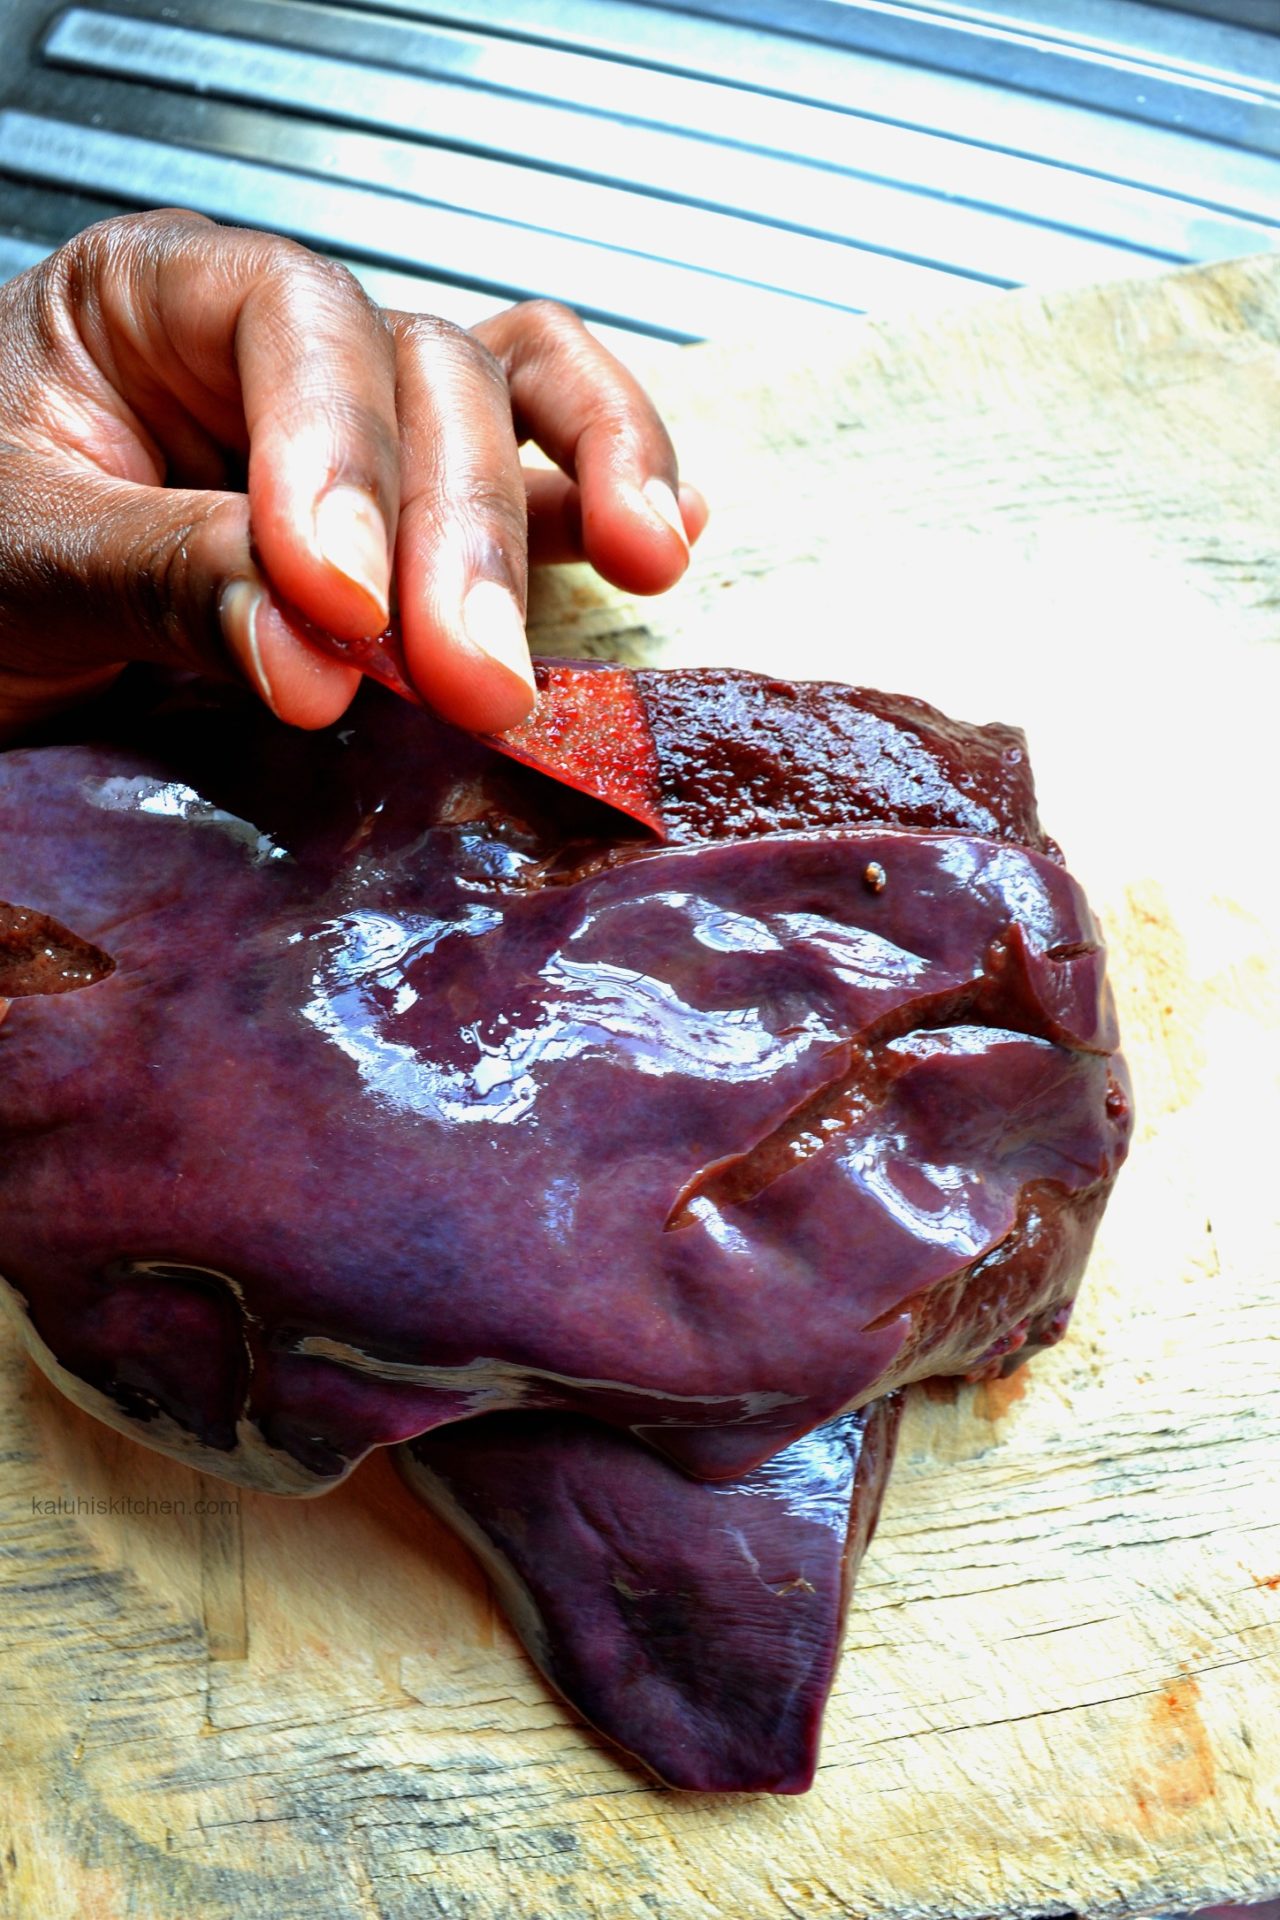 how to cook liver_before cocoking liver, remove the membrane covering the organ to make it soft_kaluhiskitchen.com